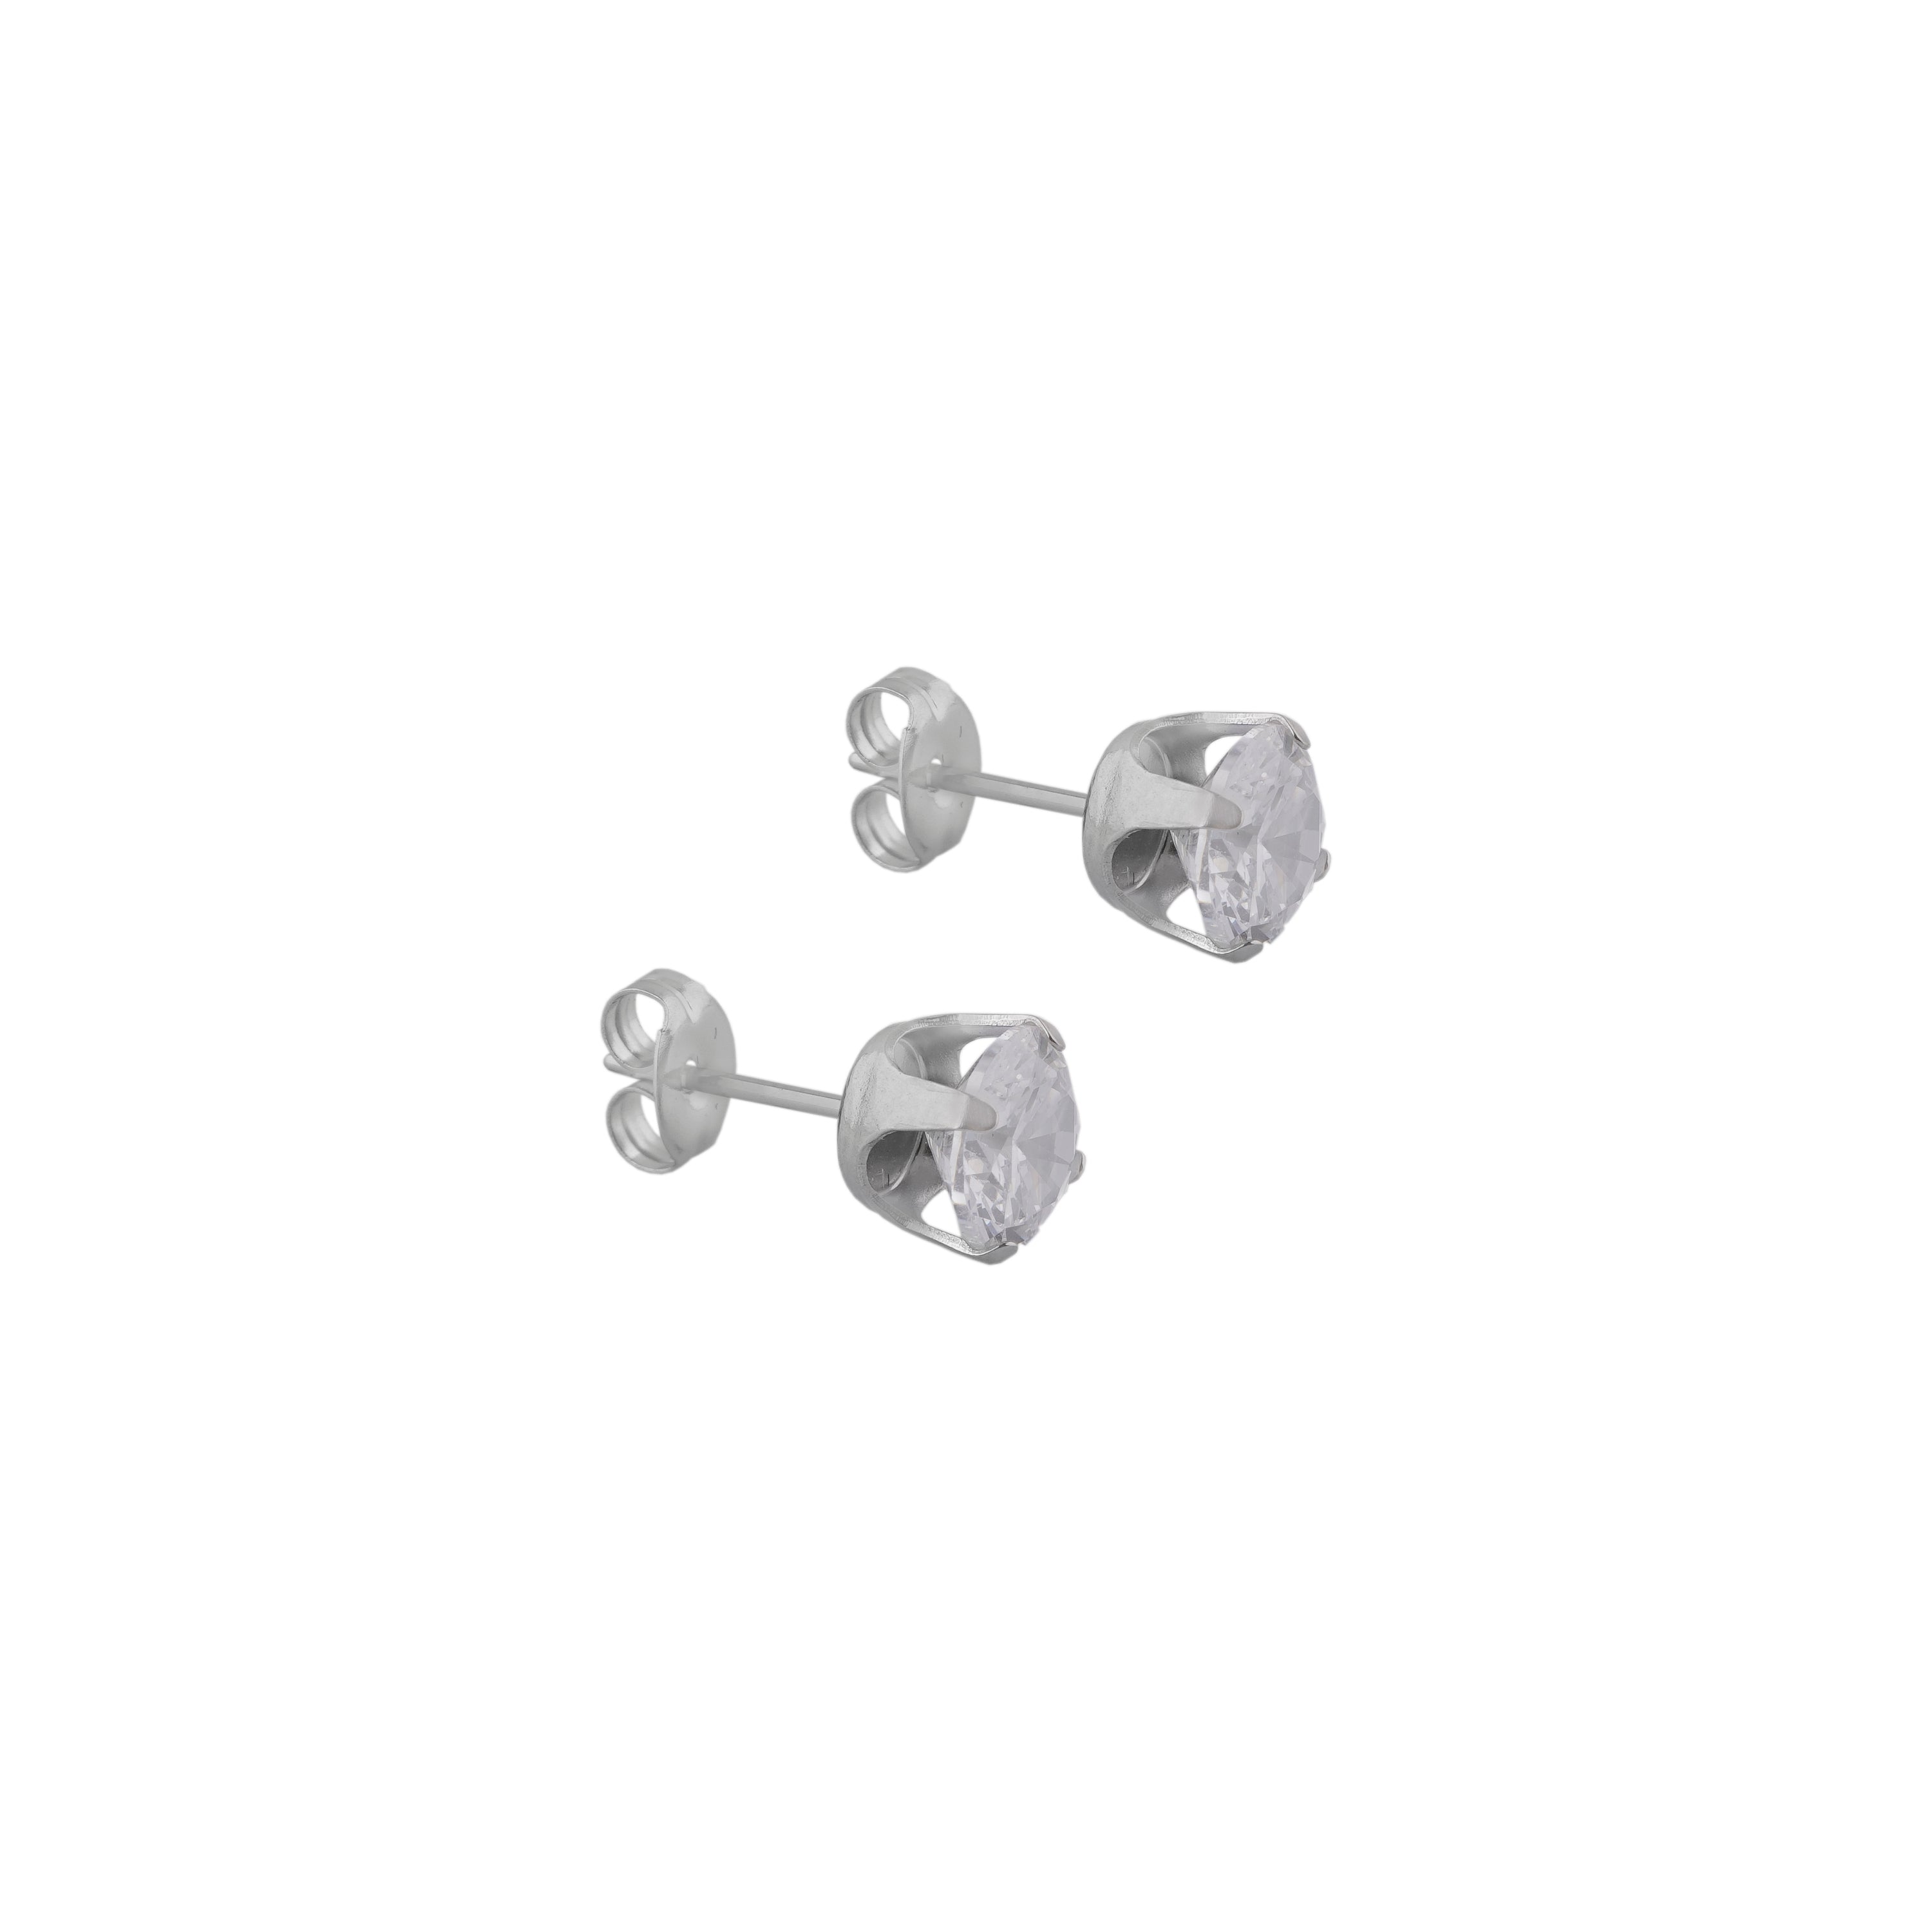 7MM Cubic Zirconia Allergy free Stainless Steel Ear Studs | MADE IN USA | Ideal for everyday wear